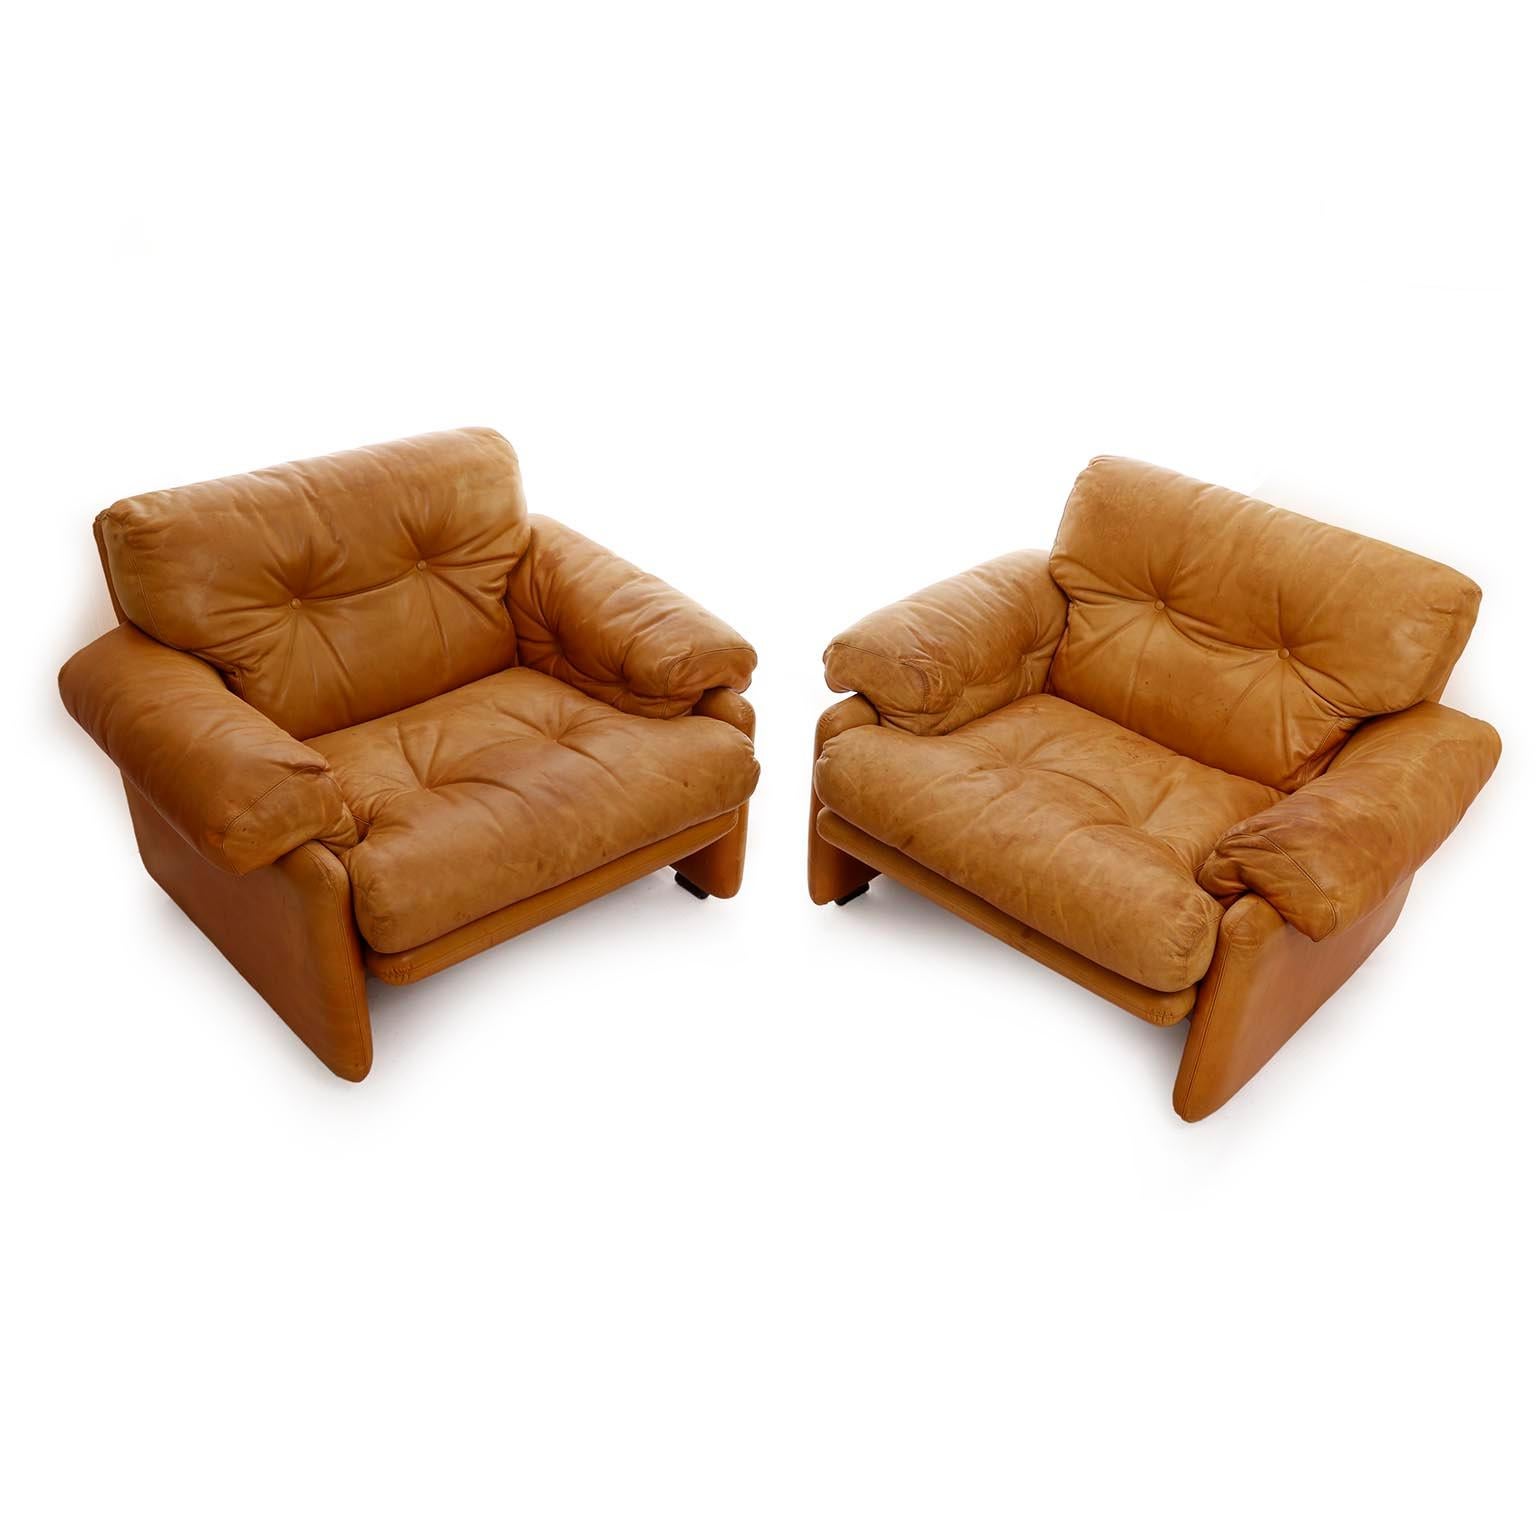 A pair of club armchairs designed by Tobia Scarpa for C&B Italia, manufactured in Italy in midcentury in 1970s.
They are made of warm toned patinated cognac leather with loose cushions for seats and backs.